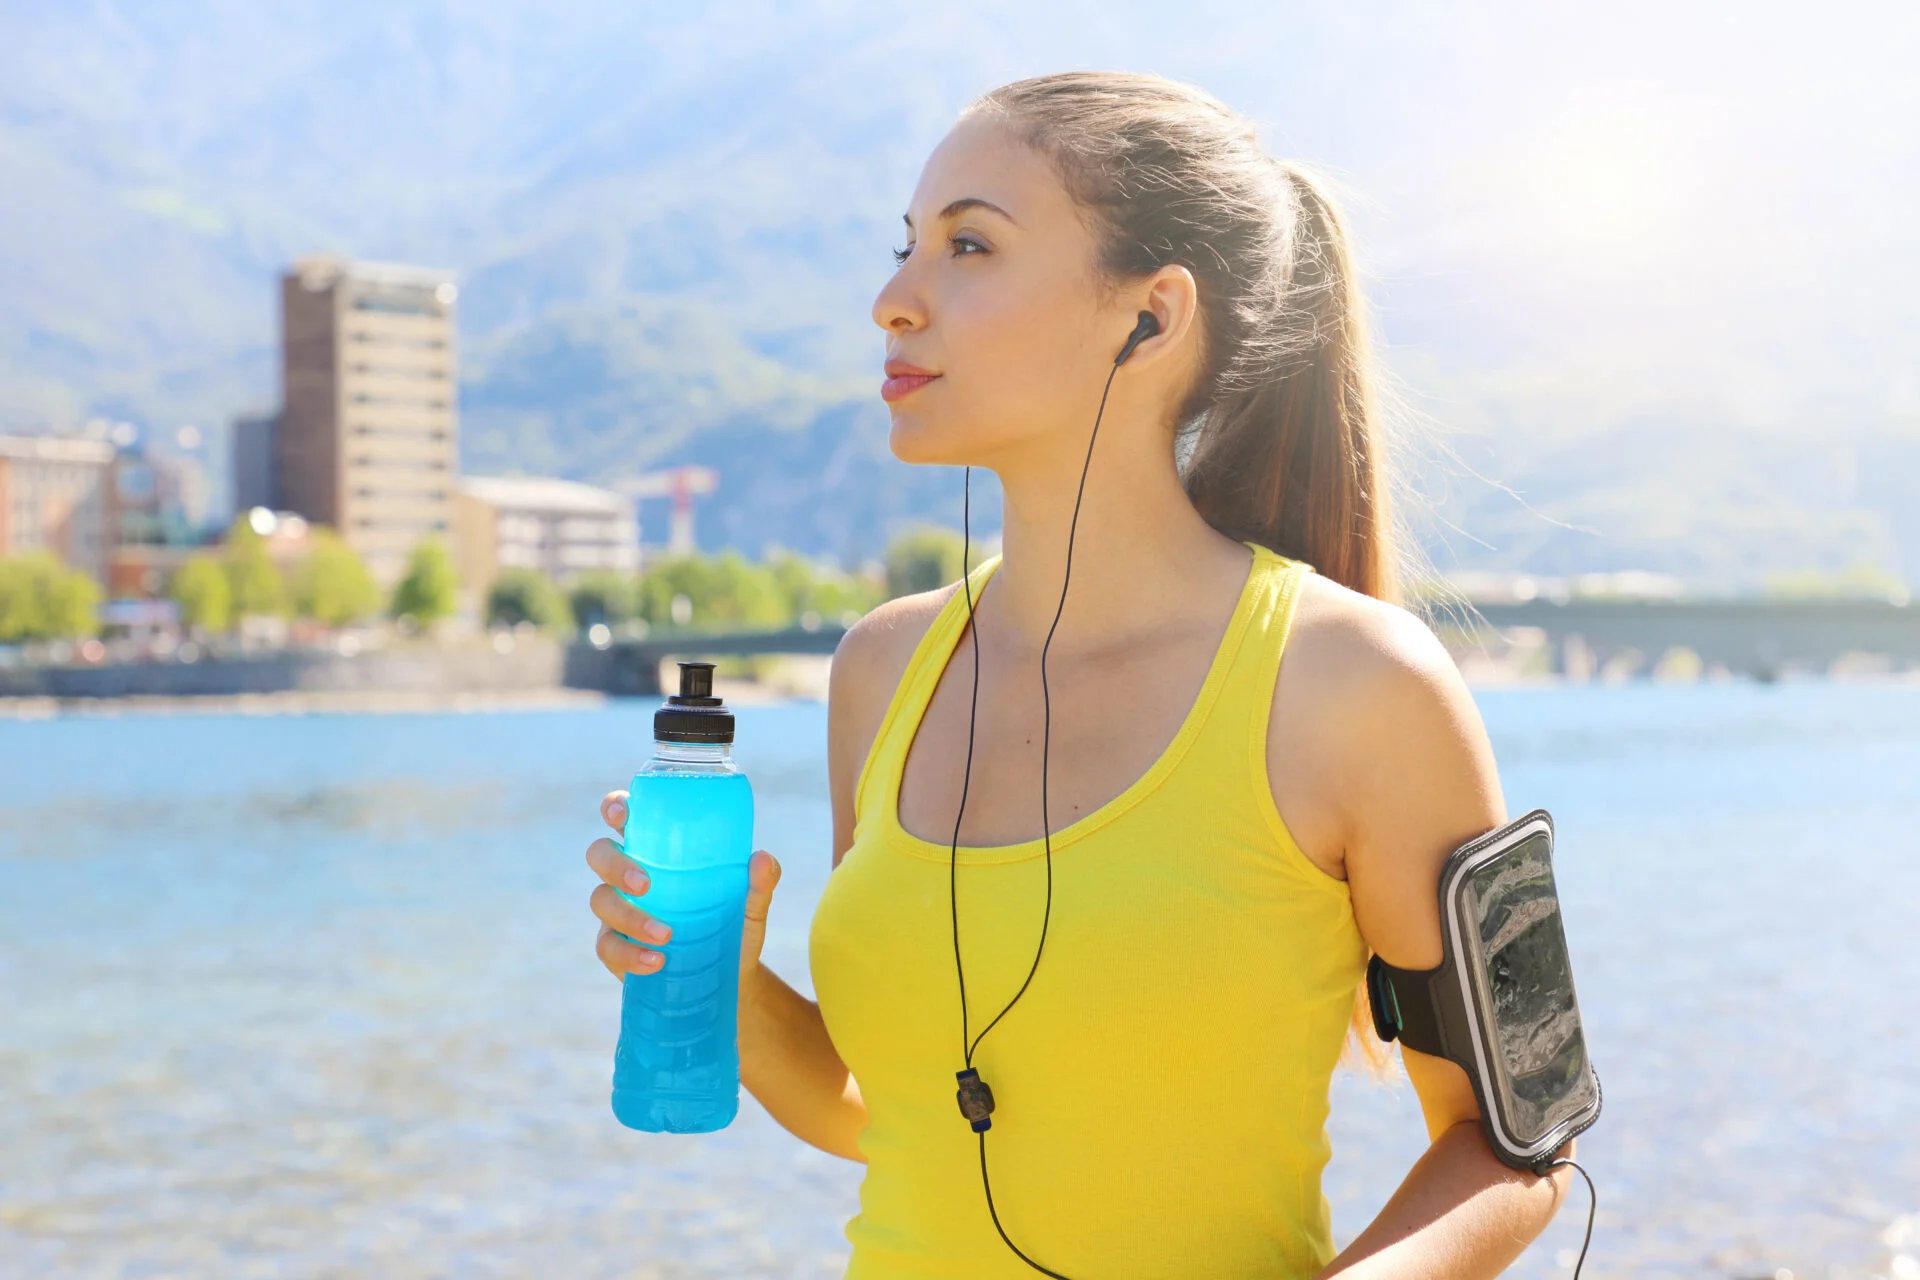 Thirsty female athlete with armband for smart phone holding power drink and looking away outdoors.